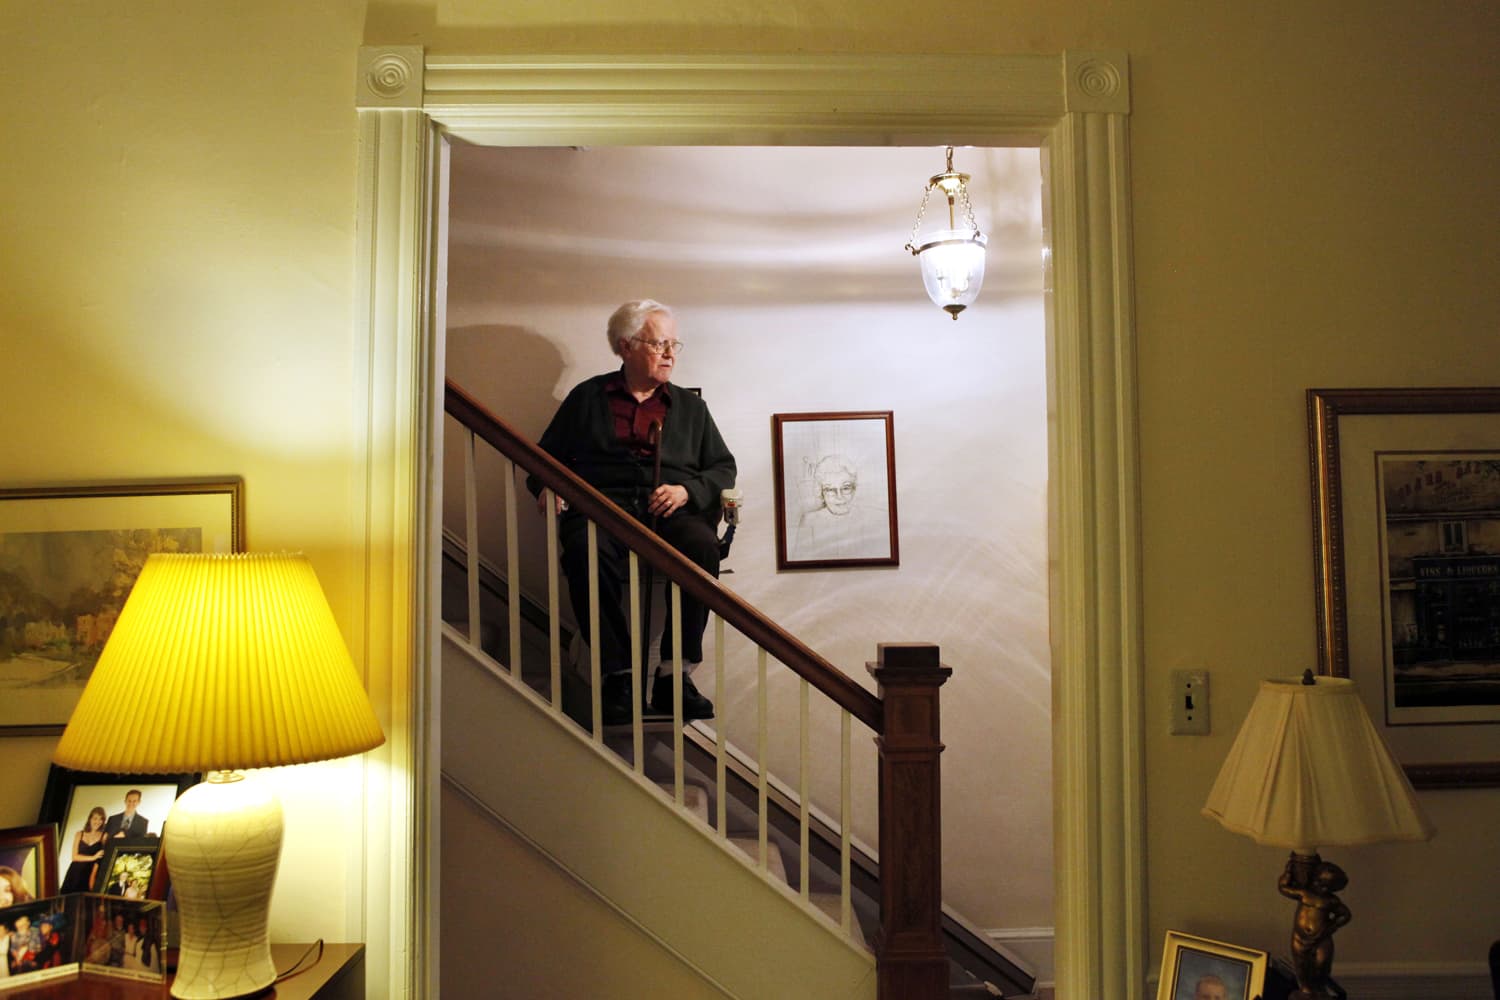 In this photo taken Oct. 12, 2011, Irving Lindenblad, 82, rides down the stairs assisted by a stair lift, at his home in Washington. (Jacquelyn Martin/AP)